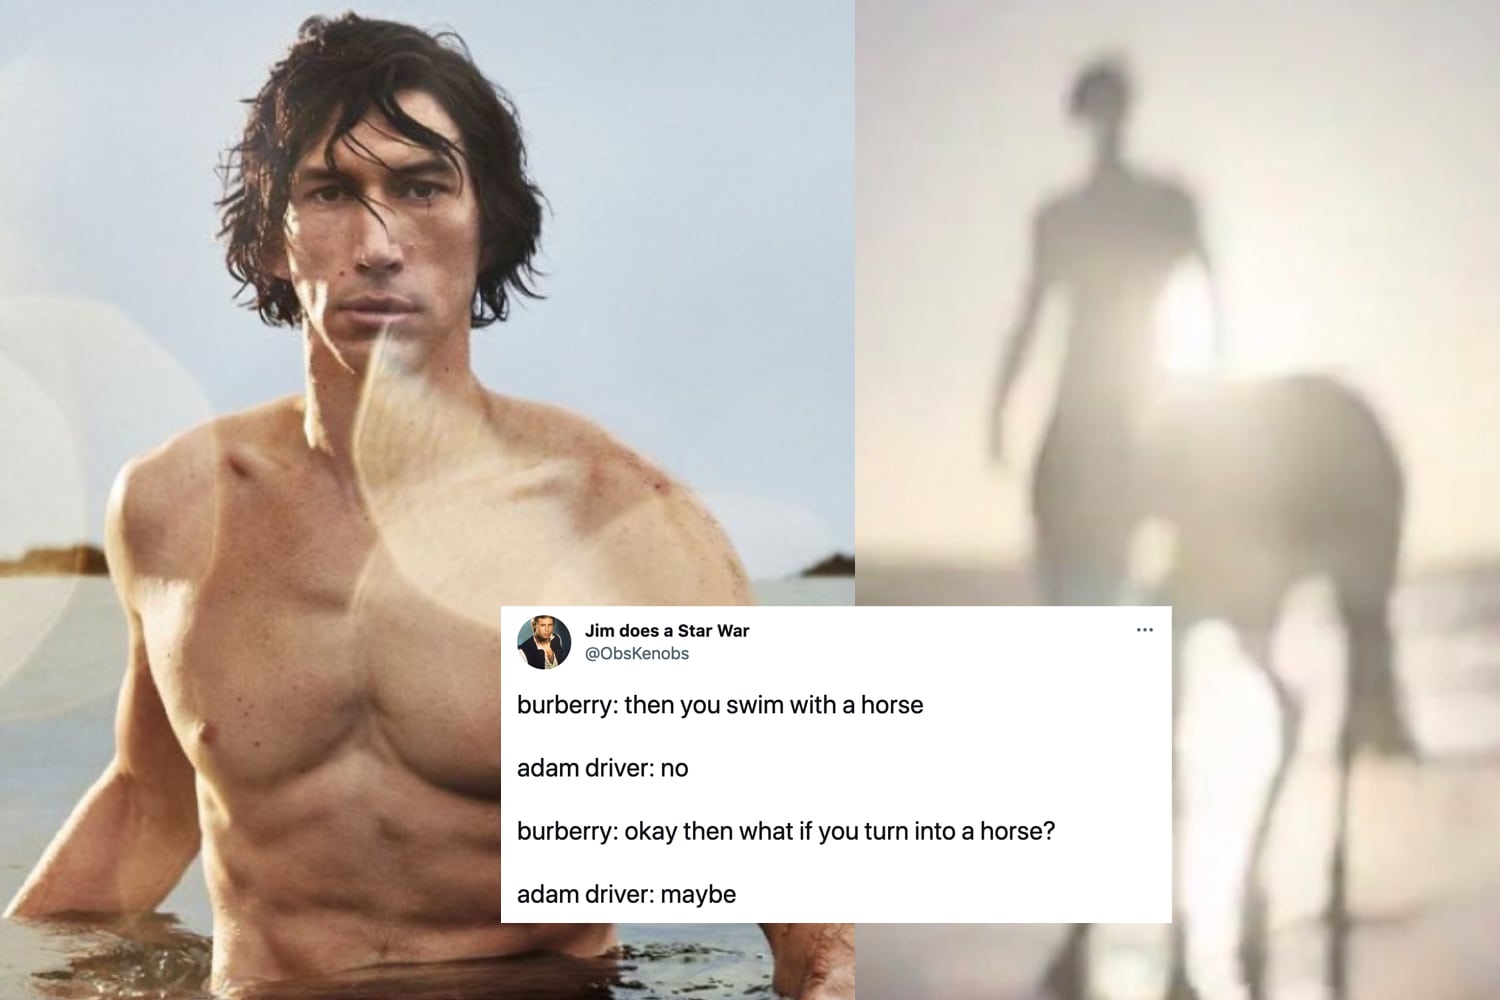 Burberry Hero Uses Adam Driver For Ad Campaign & People Can't Get Enough